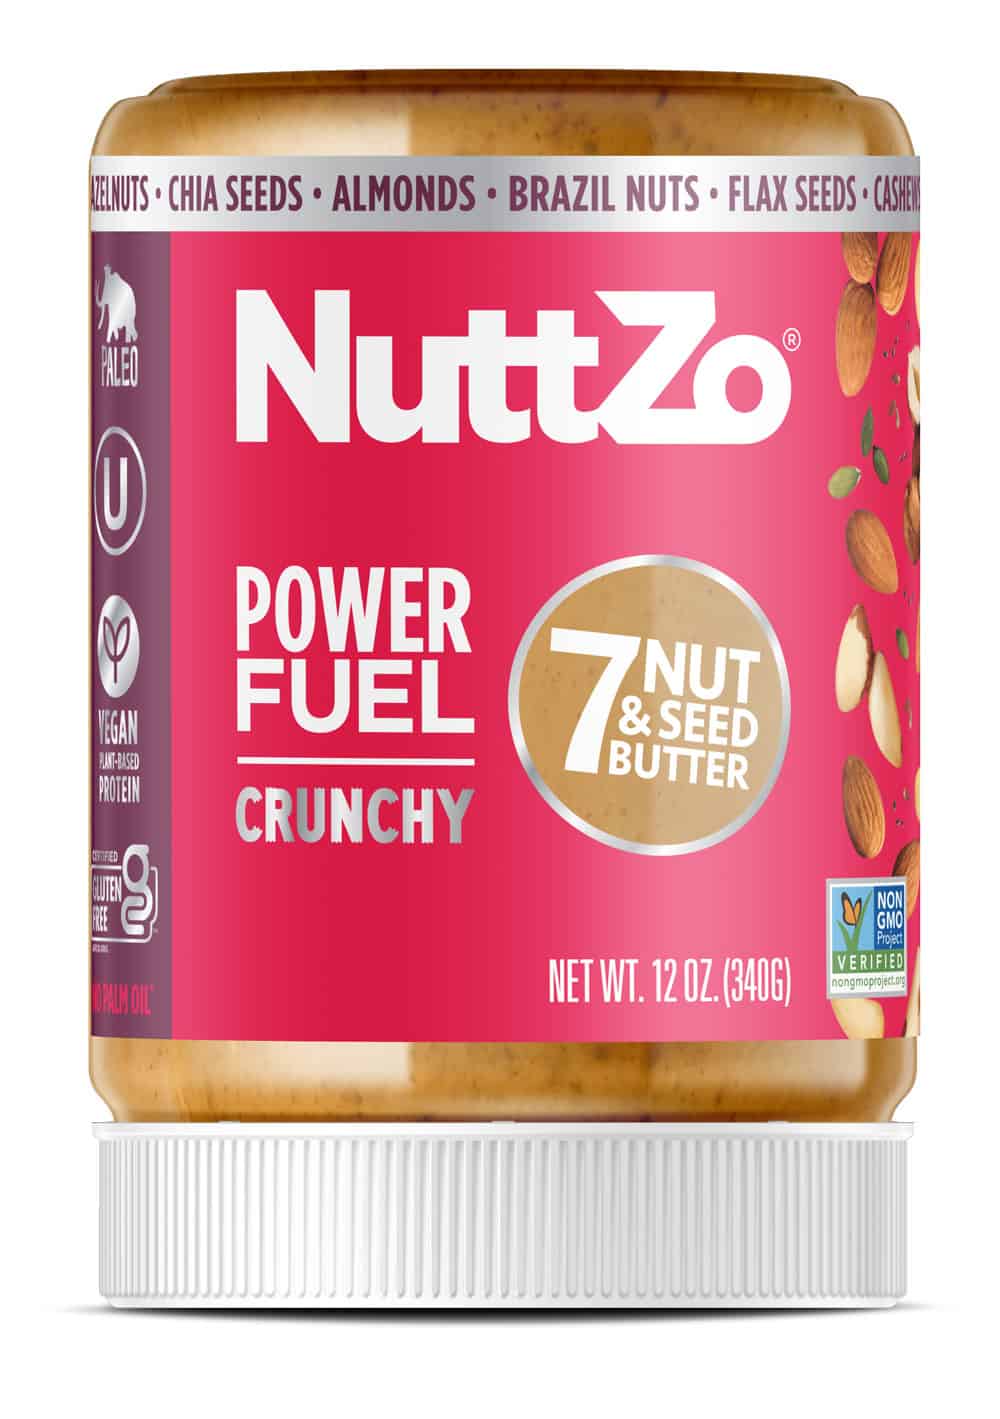 Nuttzo Power Fuel Mixed Nut & Seed Butter - Crunchy 6 units per case 12.0 oz